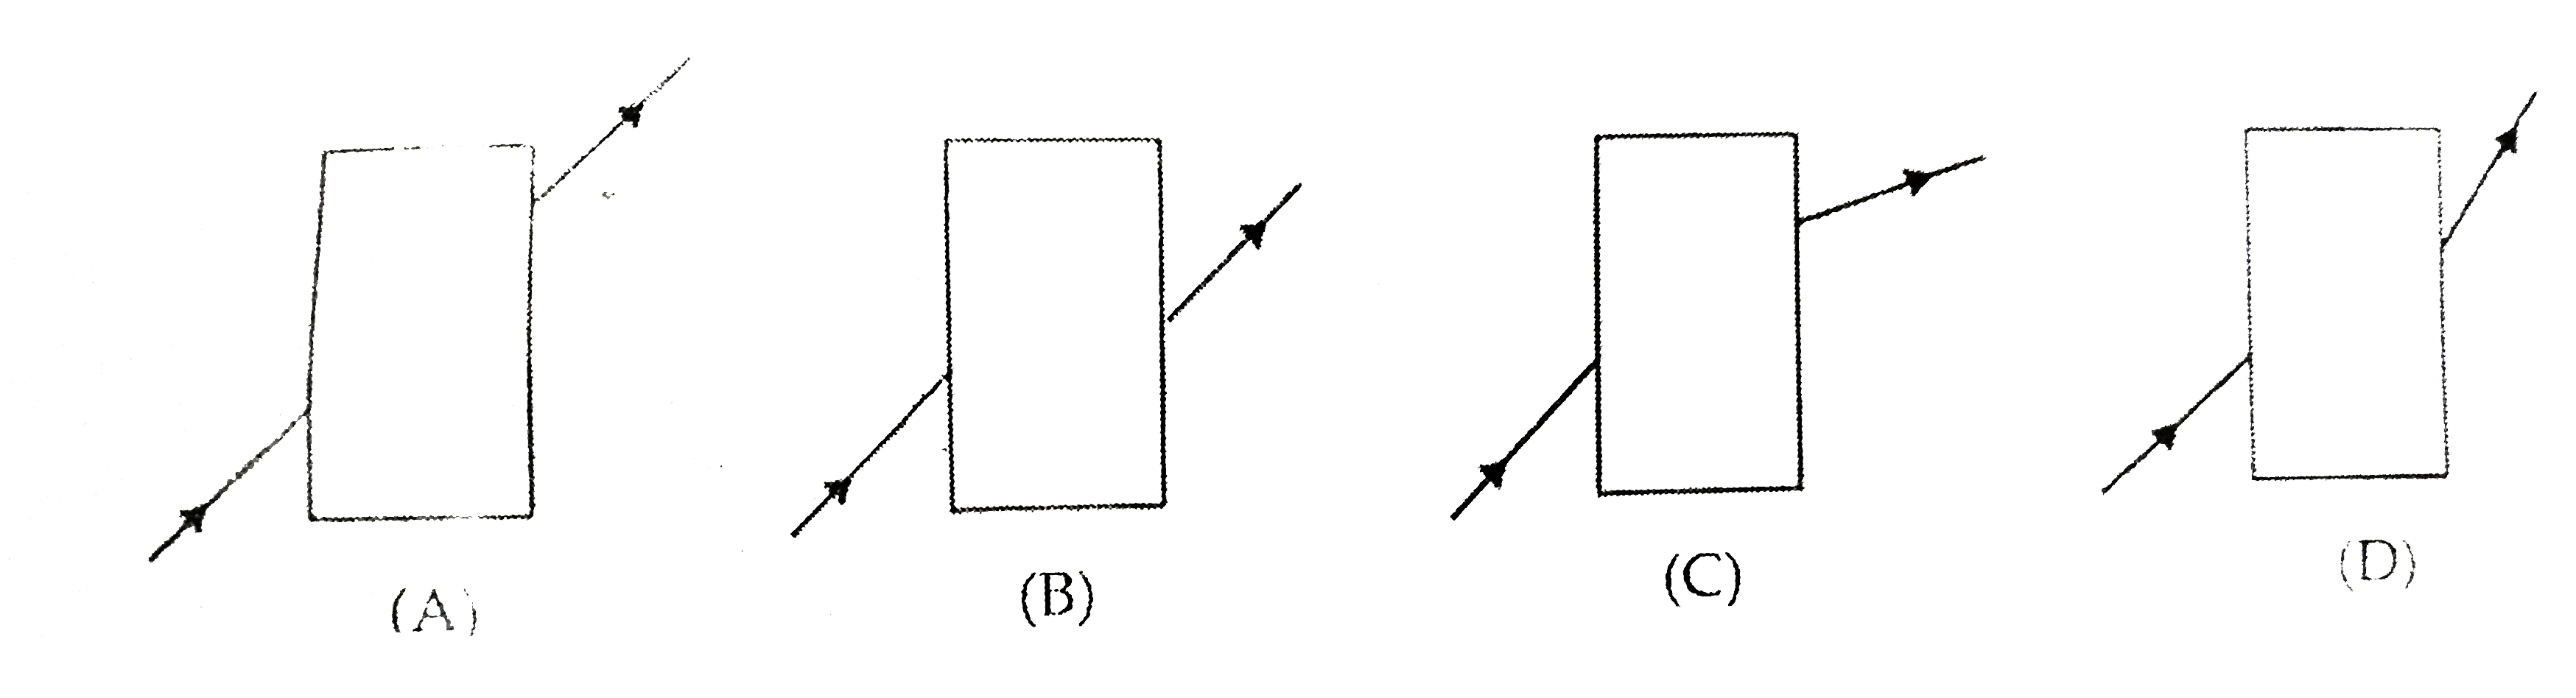 Four students A, B, C and D showed the following traces of the path of a ray of light passing through a rectangular glass slab.  The trace most likely to be correct is that of student :